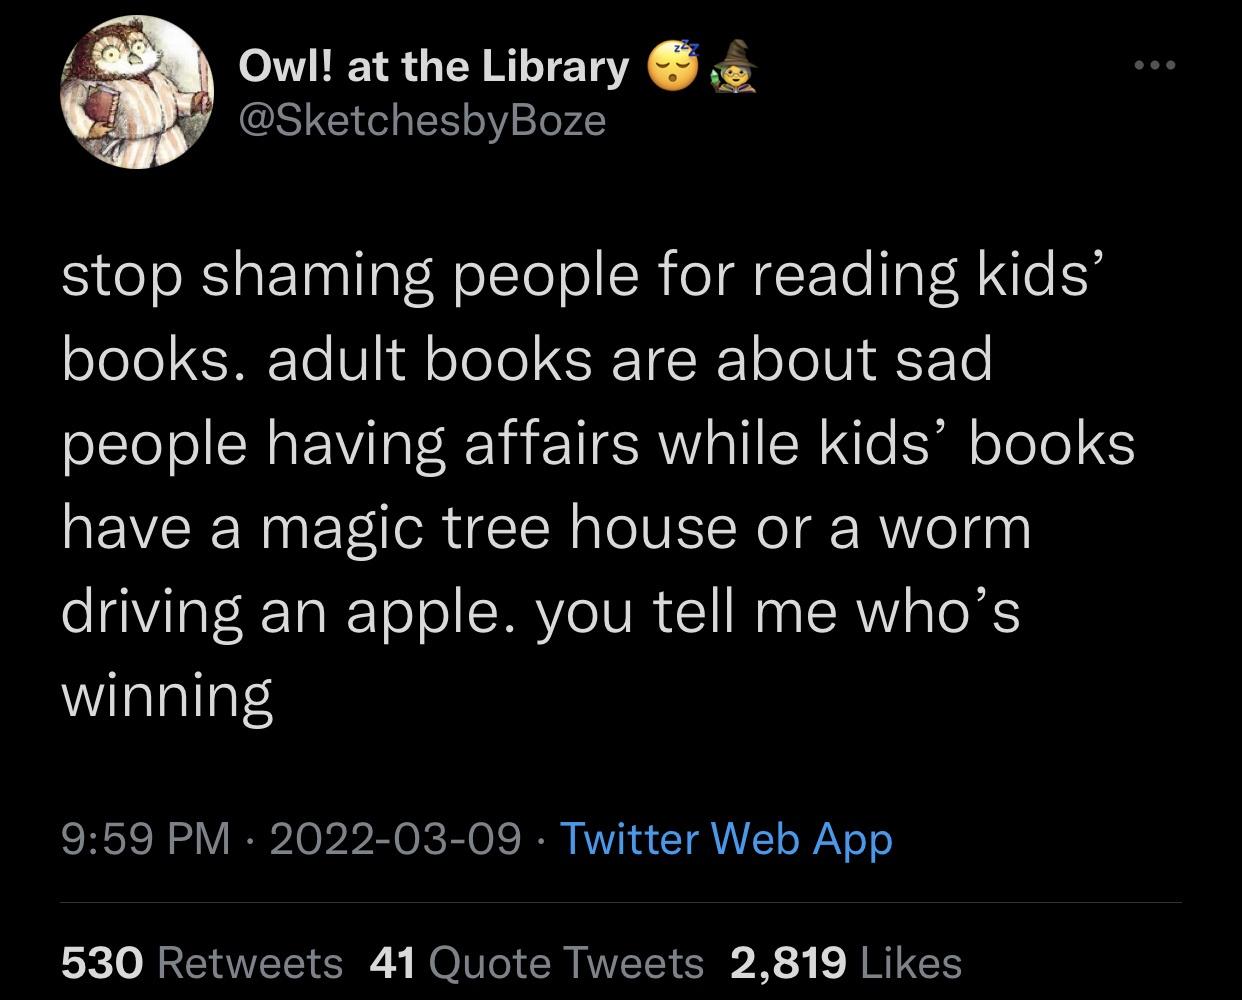 let+adults+read+kid+books+if+they+want%21